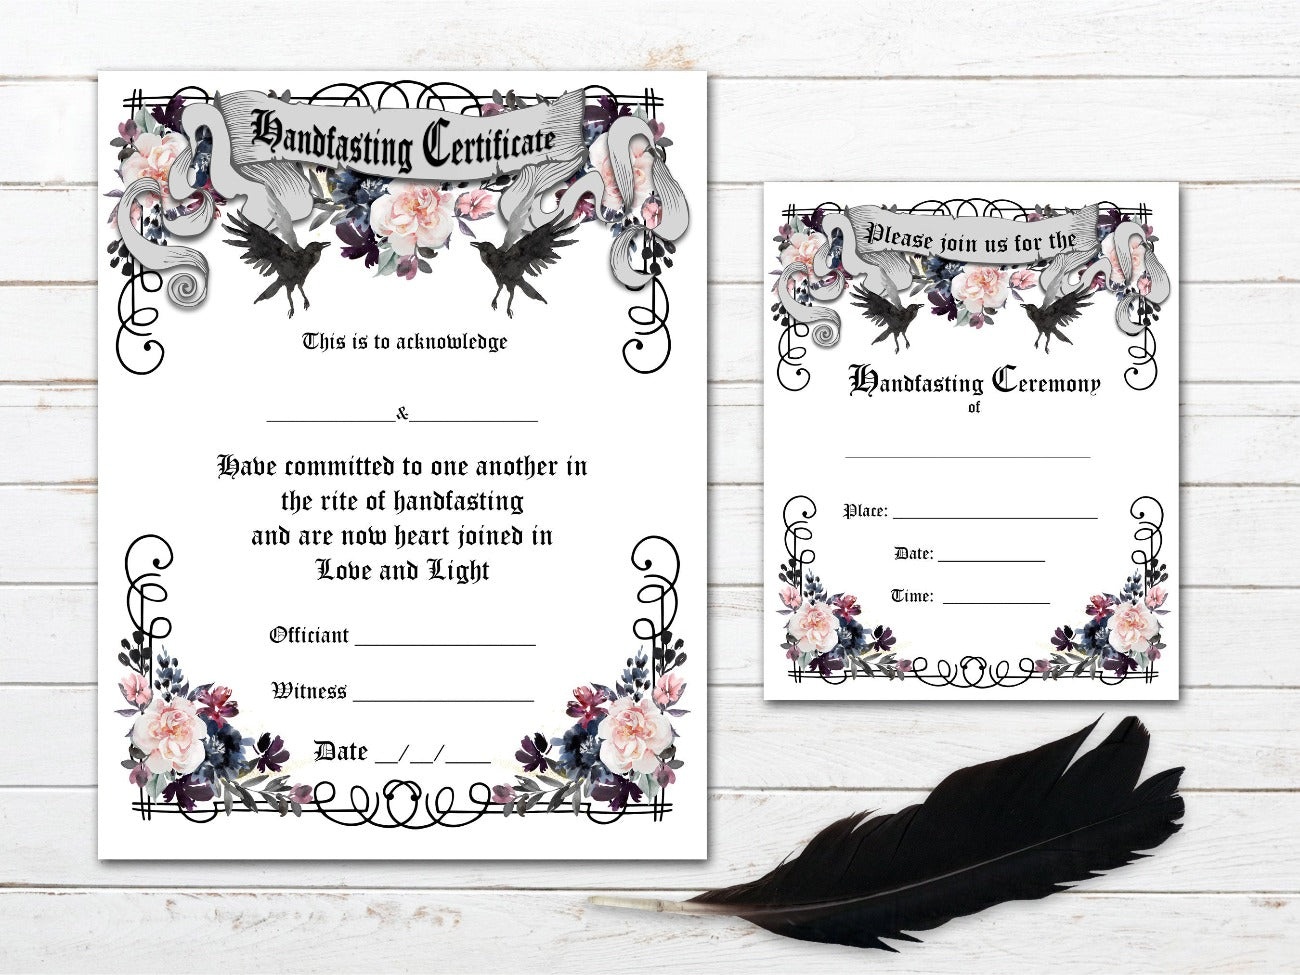 Ravens Handfasting Certificate and Invitation shown with the optional white background.